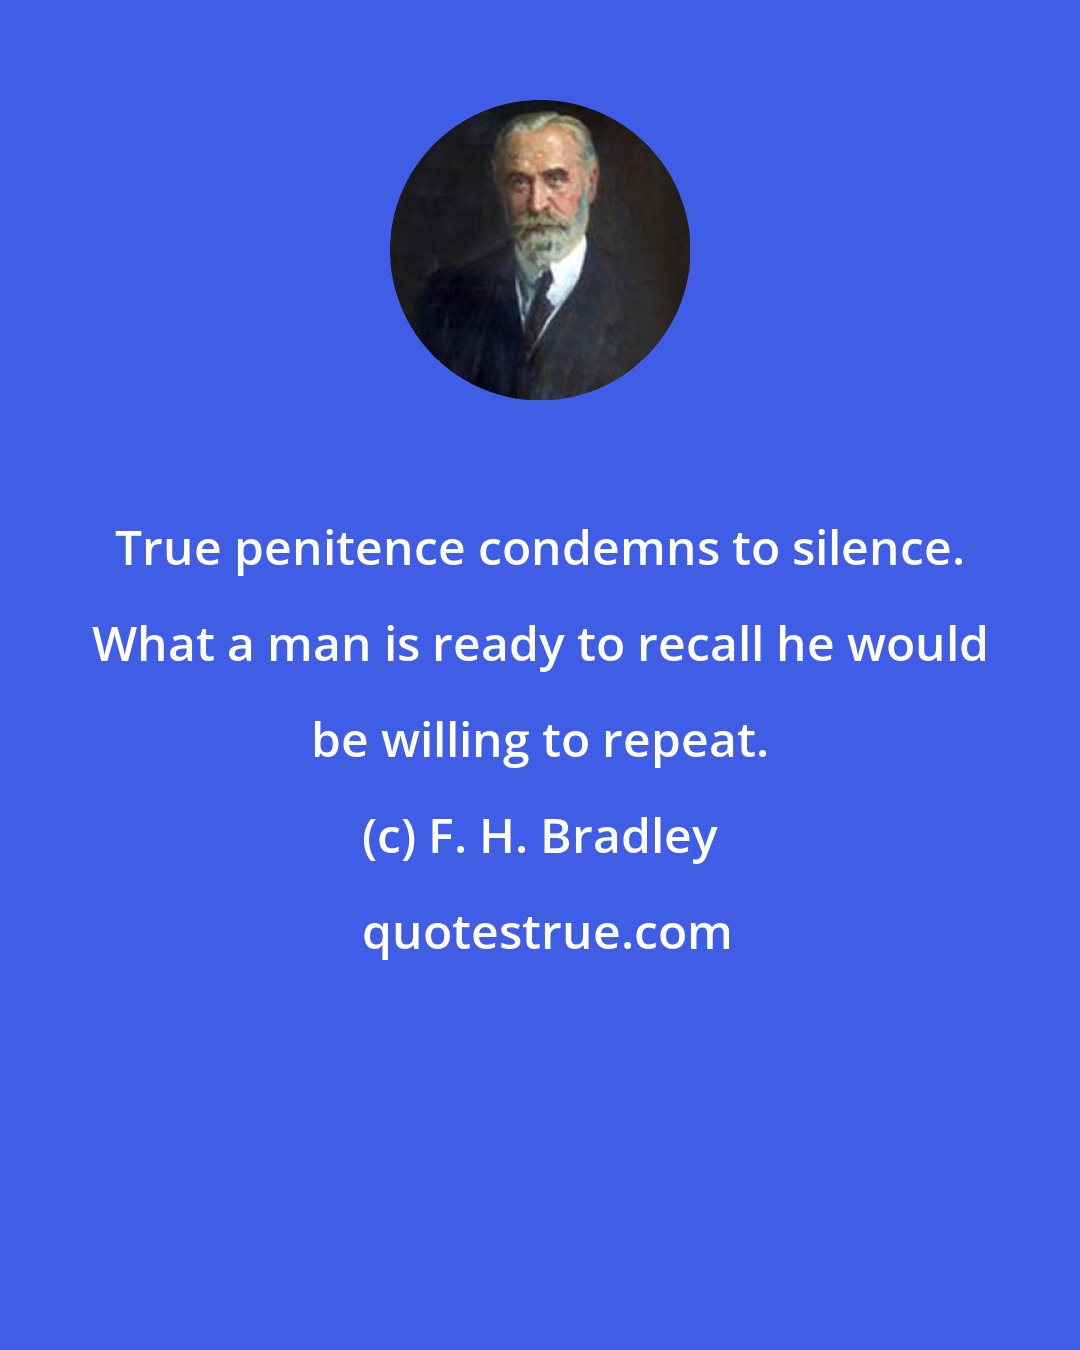 F. H. Bradley: True penitence condemns to silence. What a man is ready to recall he would be willing to repeat.